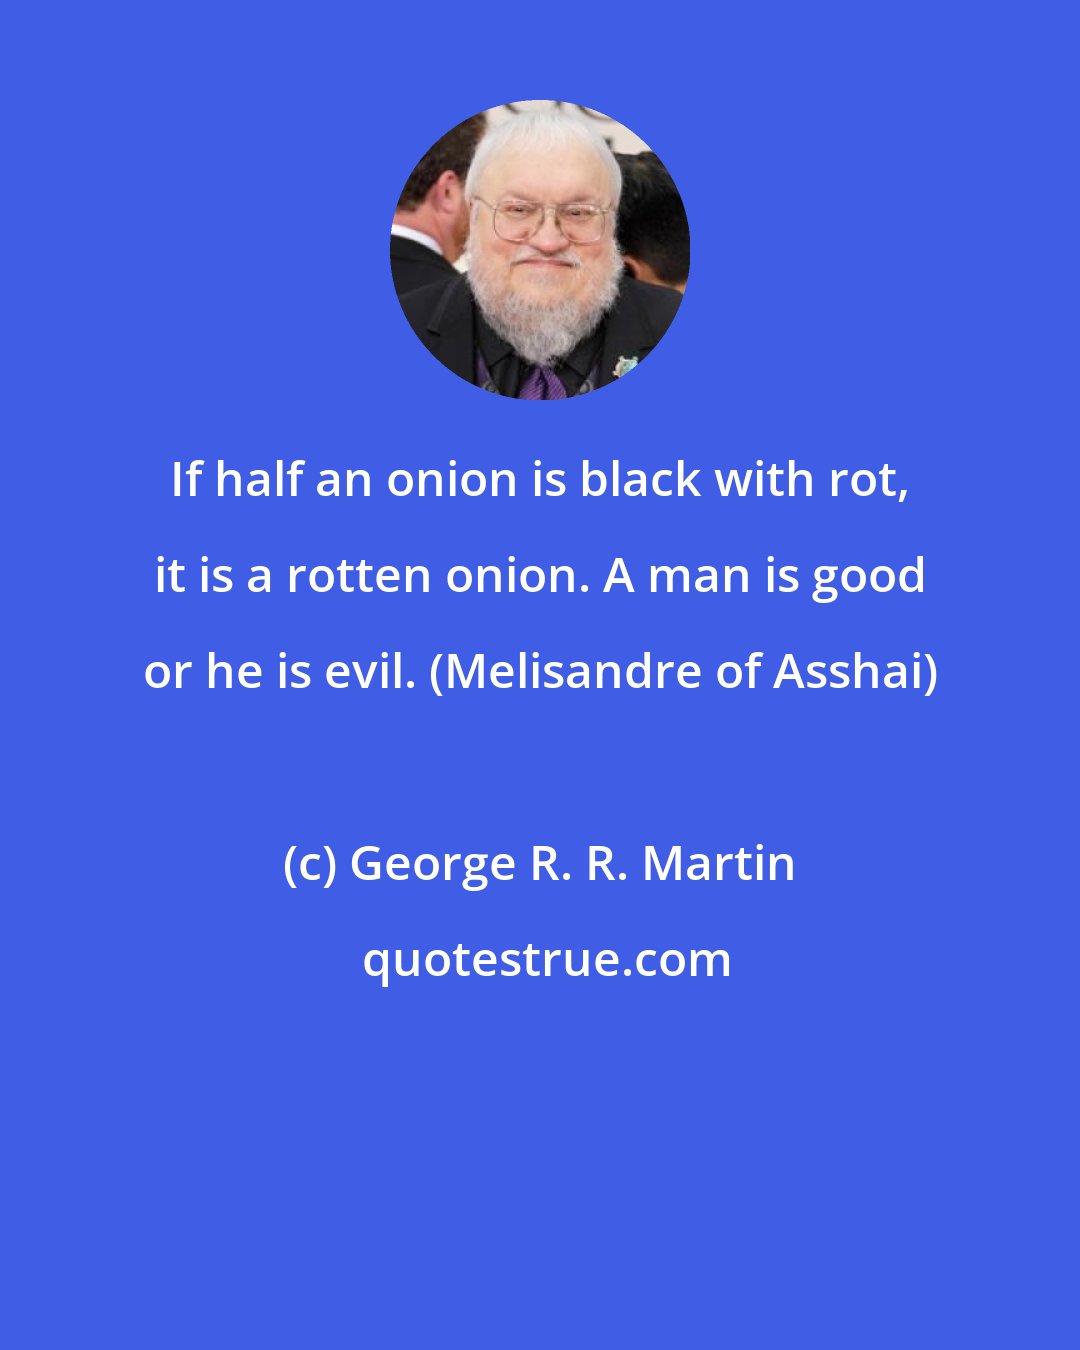 George R. R. Martin: If half an onion is black with rot, it is a rotten onion. A man is good or he is evil. (Melisandre of Asshai)